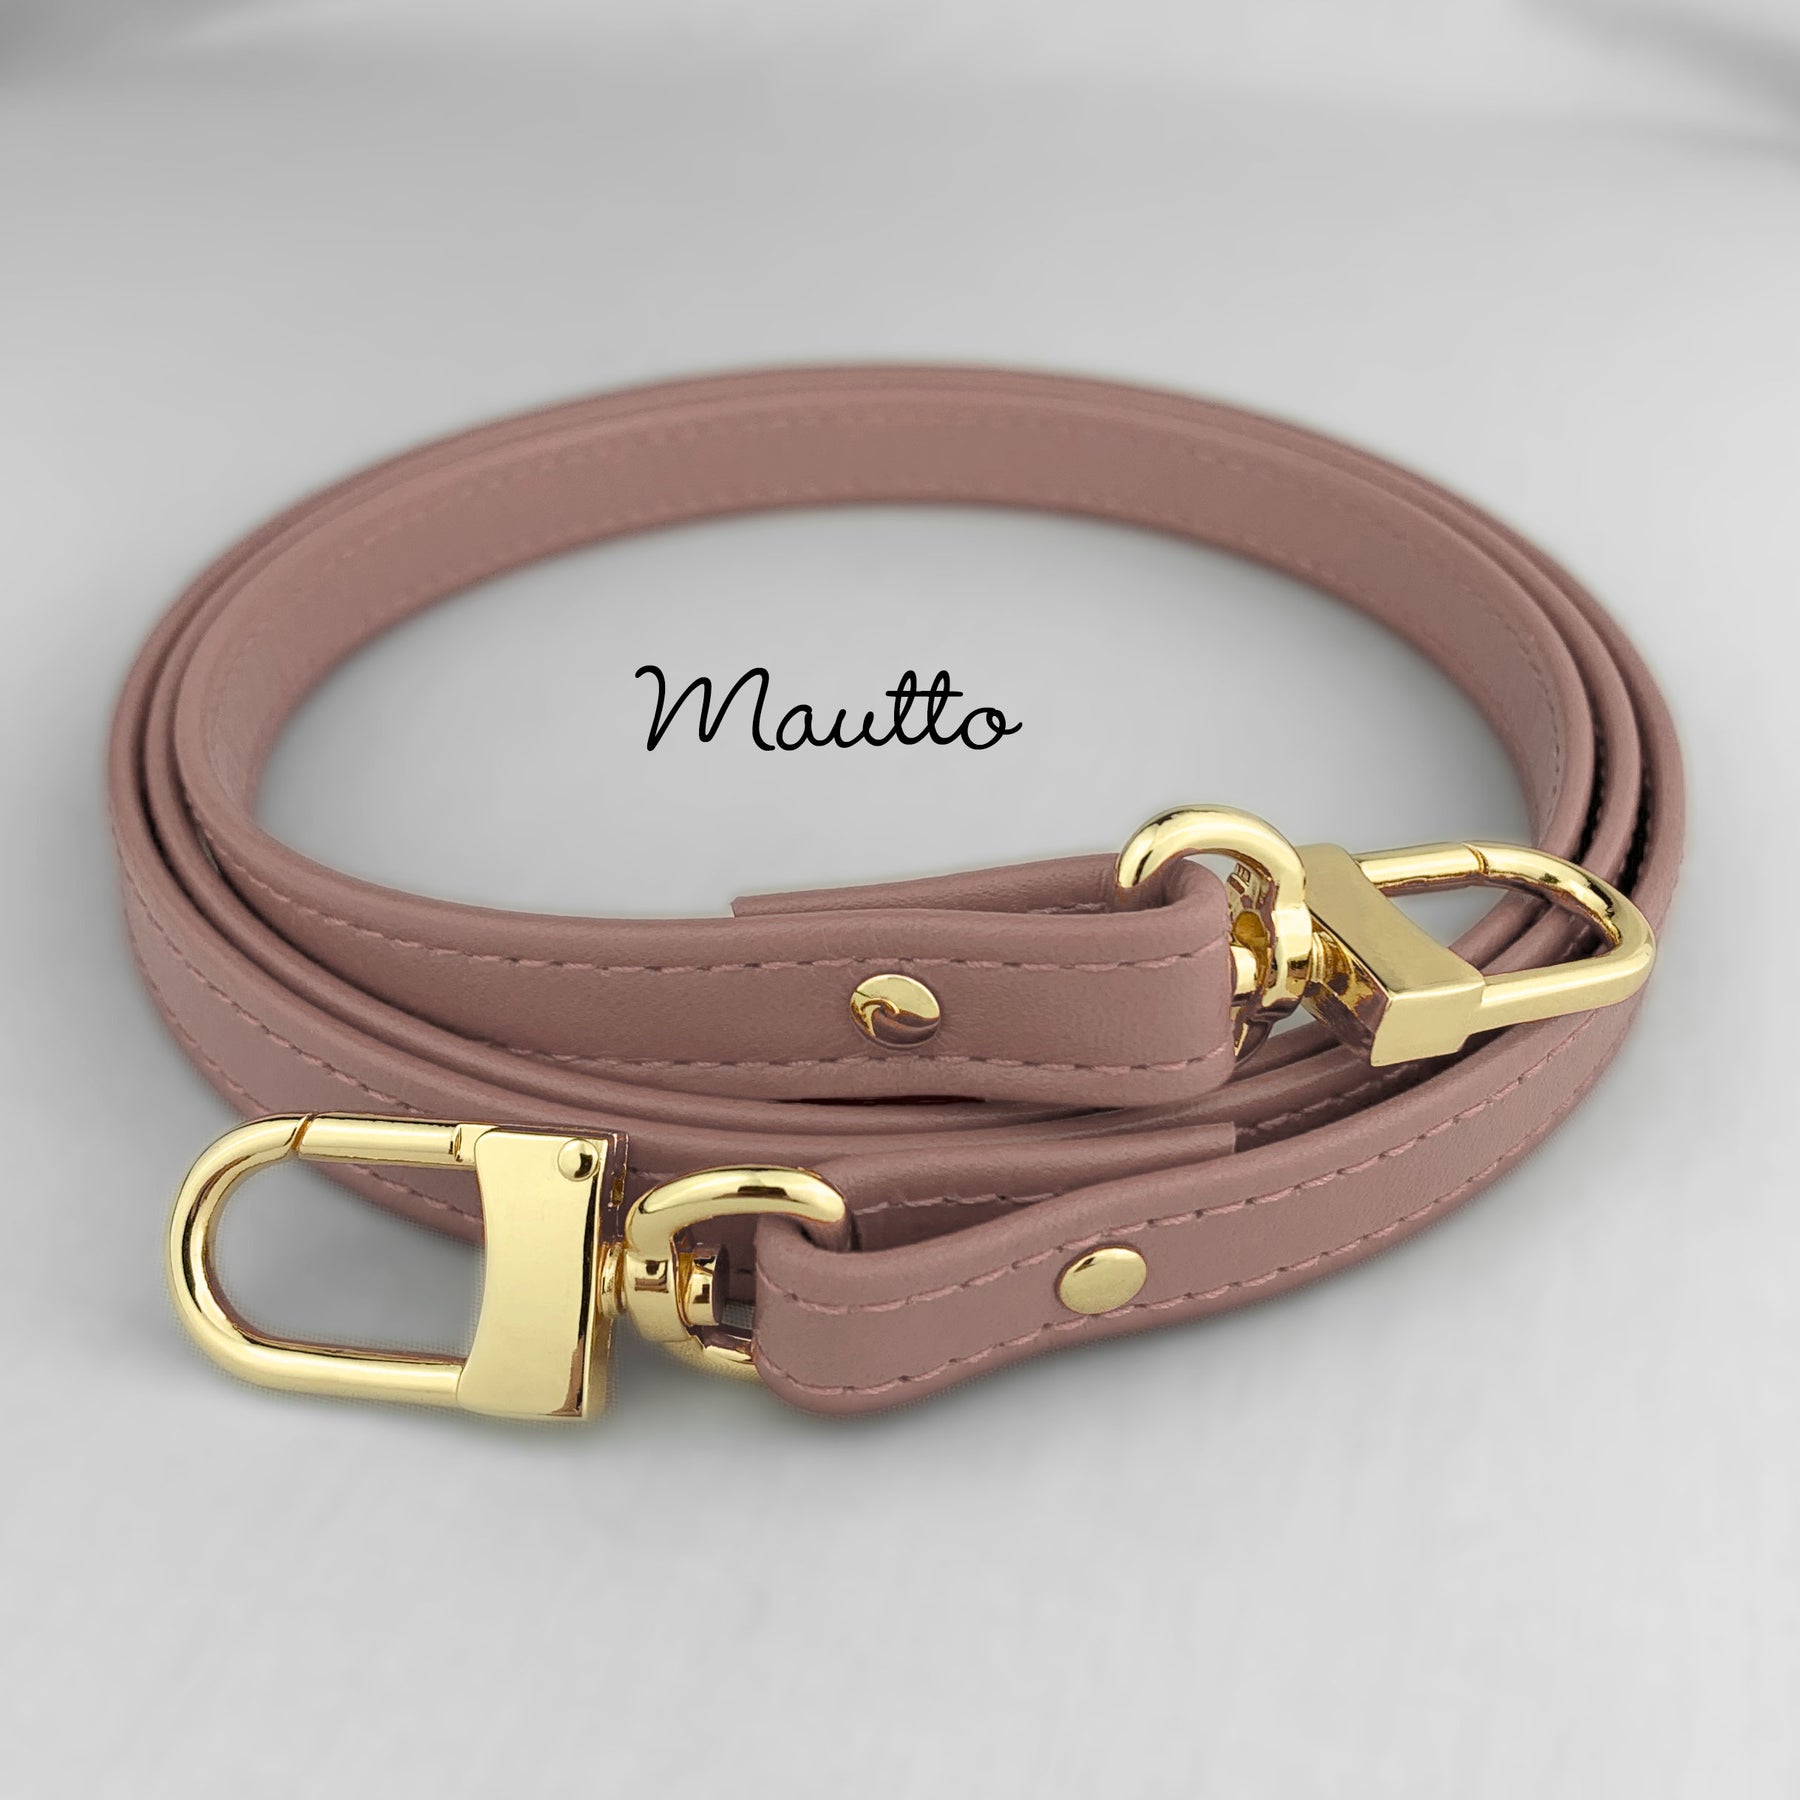 Leather Wrist Strap - 1/2 inch (13mm) Wide - Gold, Silver, Black Clip Light Tan Leather / Gold-Tone